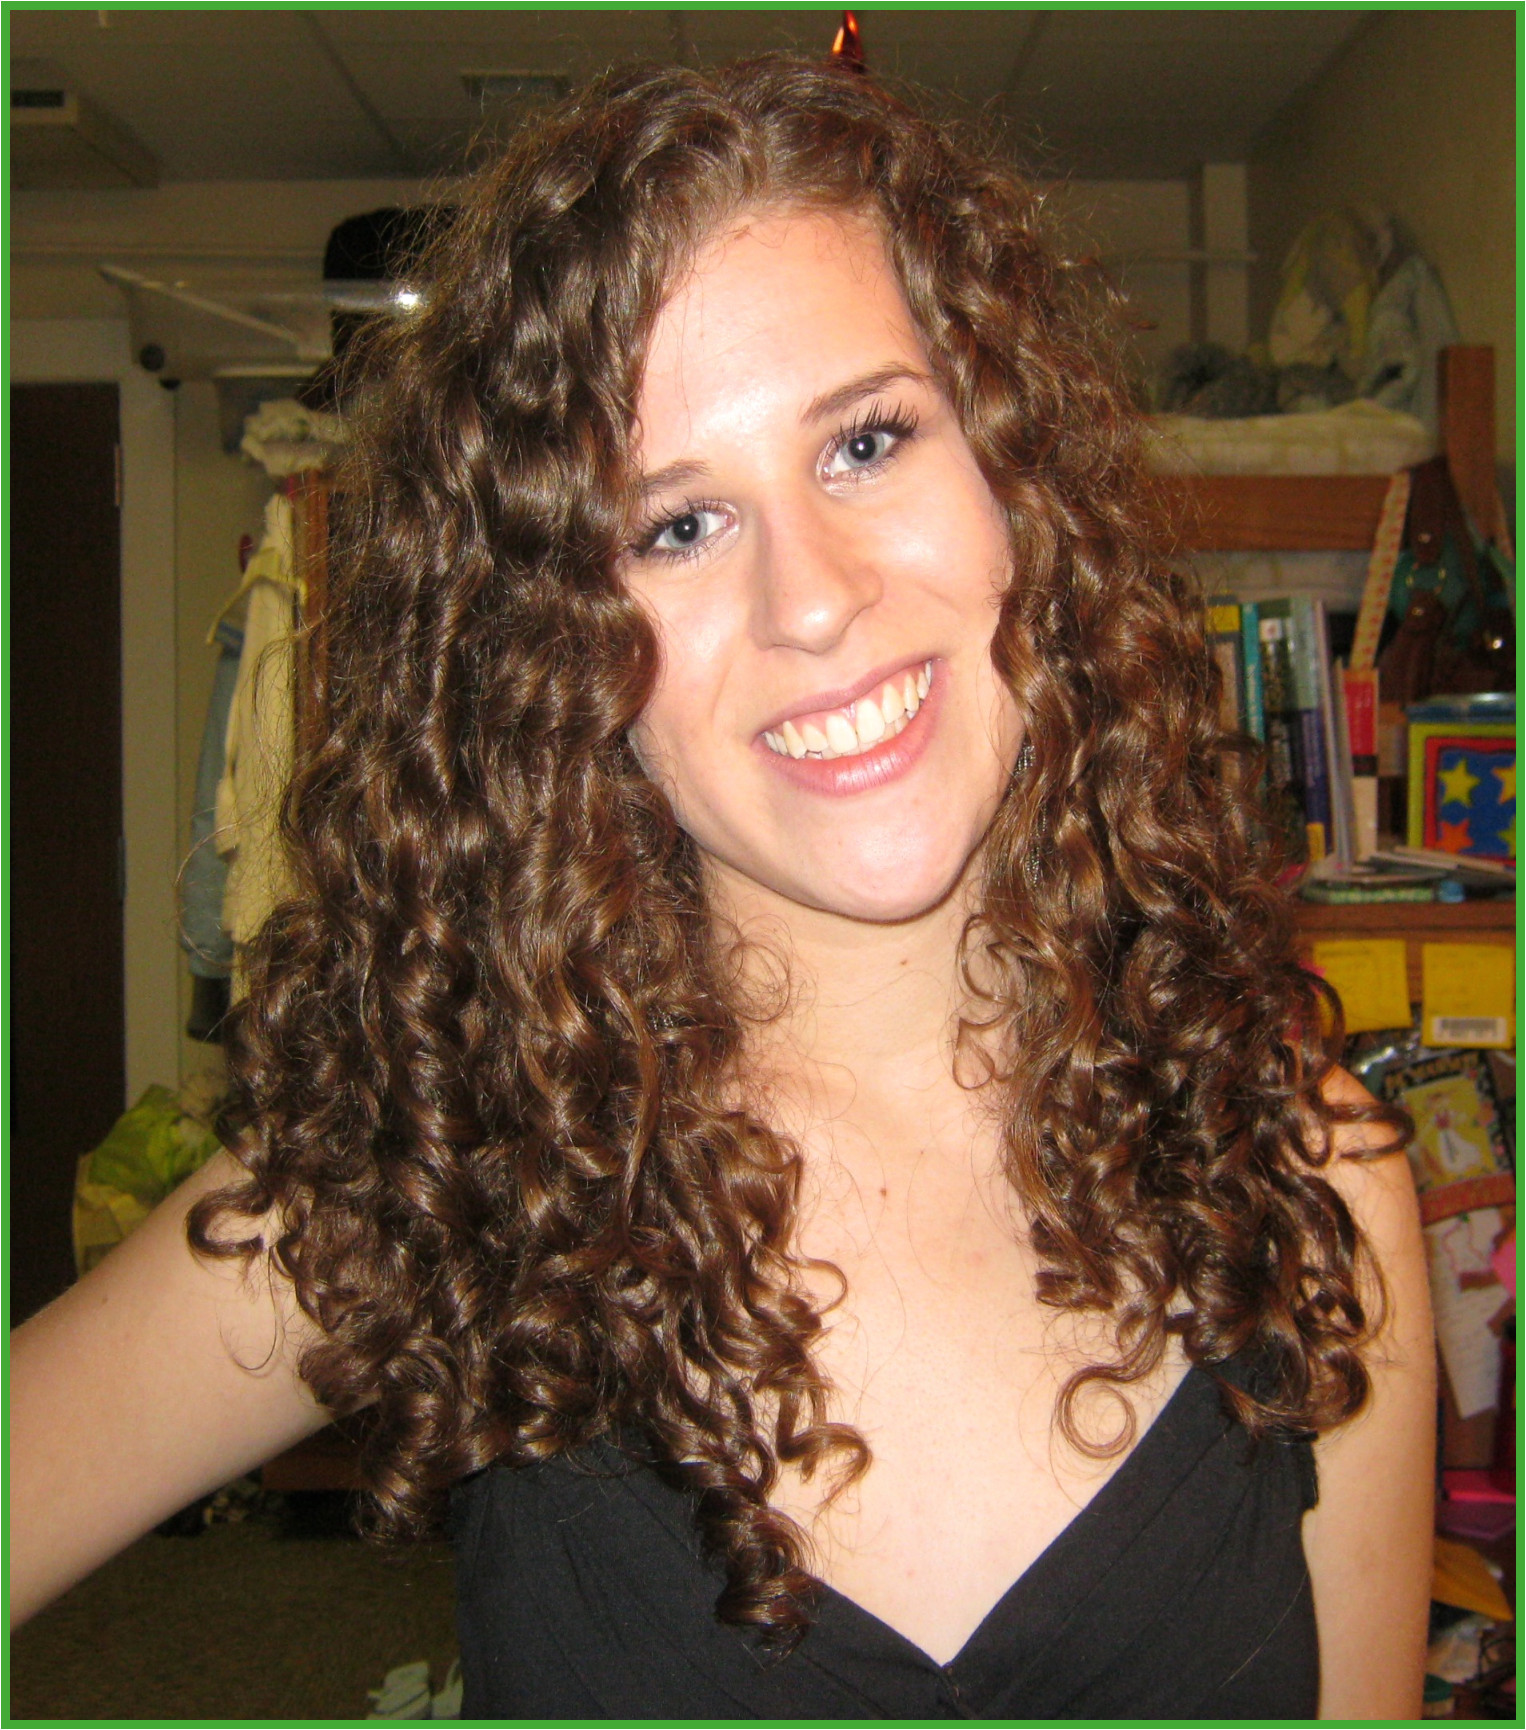 Cute Hairstyles for Short Curly Hair s Exciting Very Curly Hairstyles Fresh Curly Hair 0d Archives